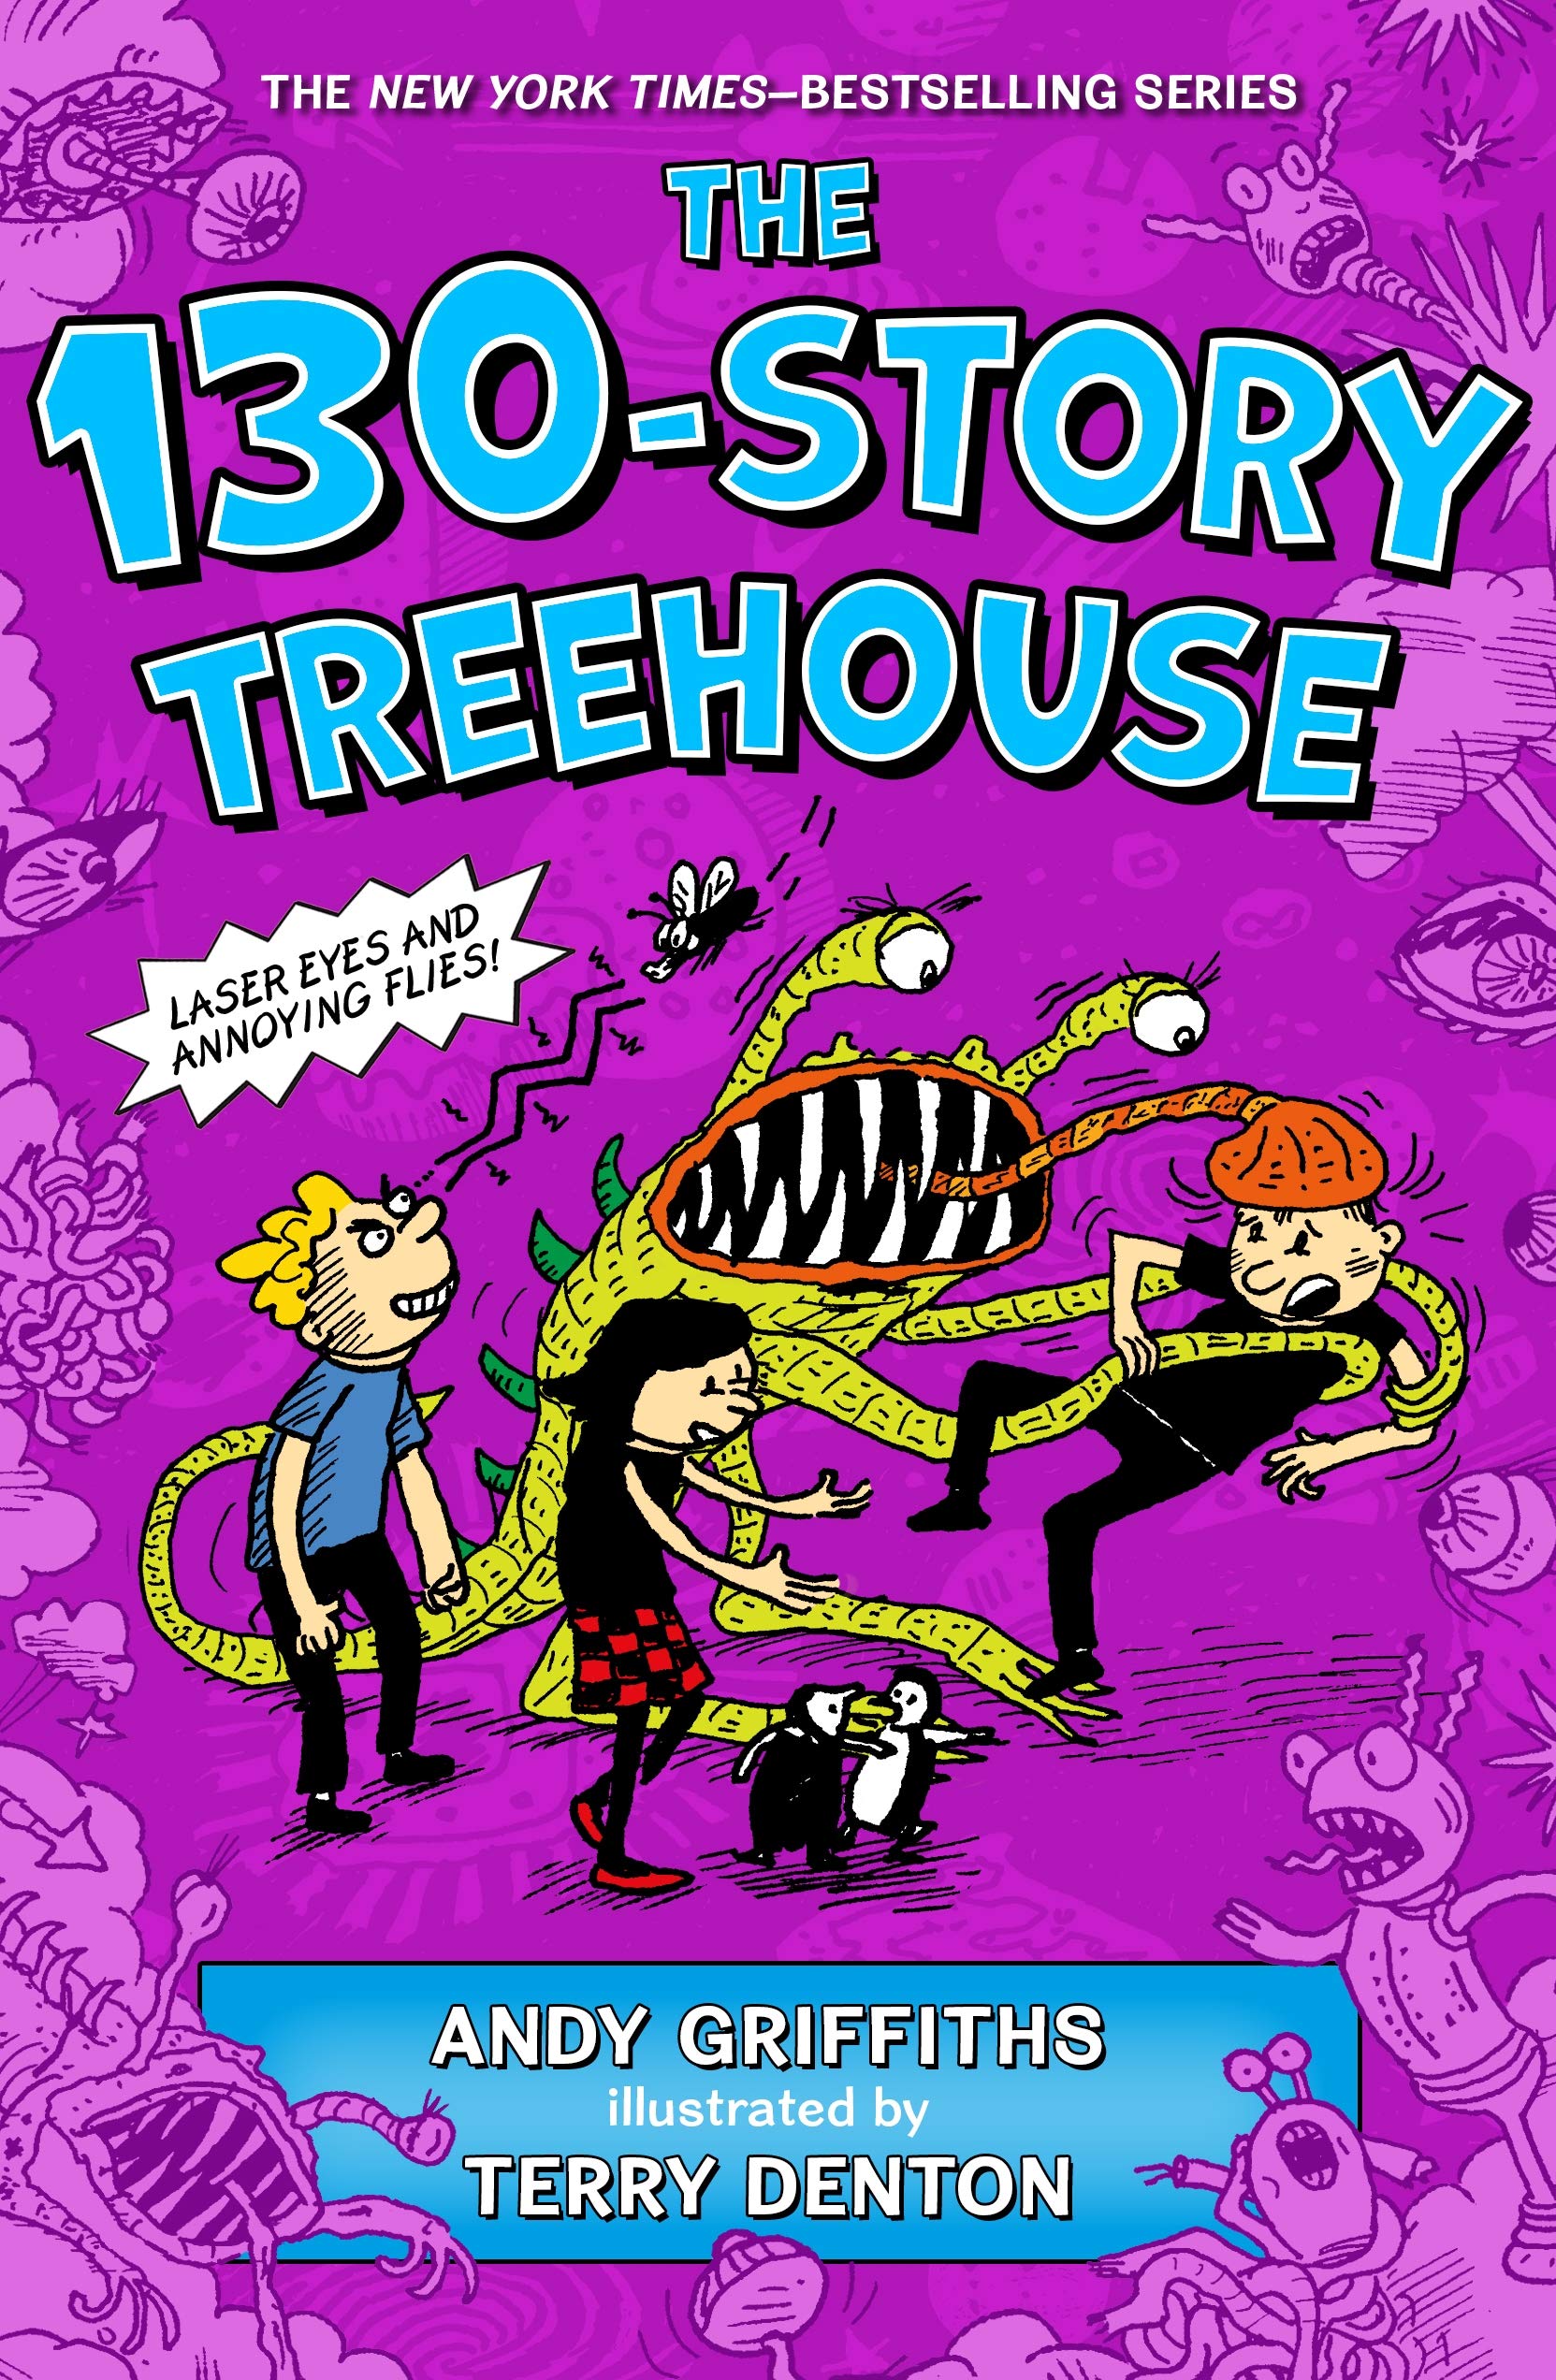 Image for "The 130-Story Treehouse